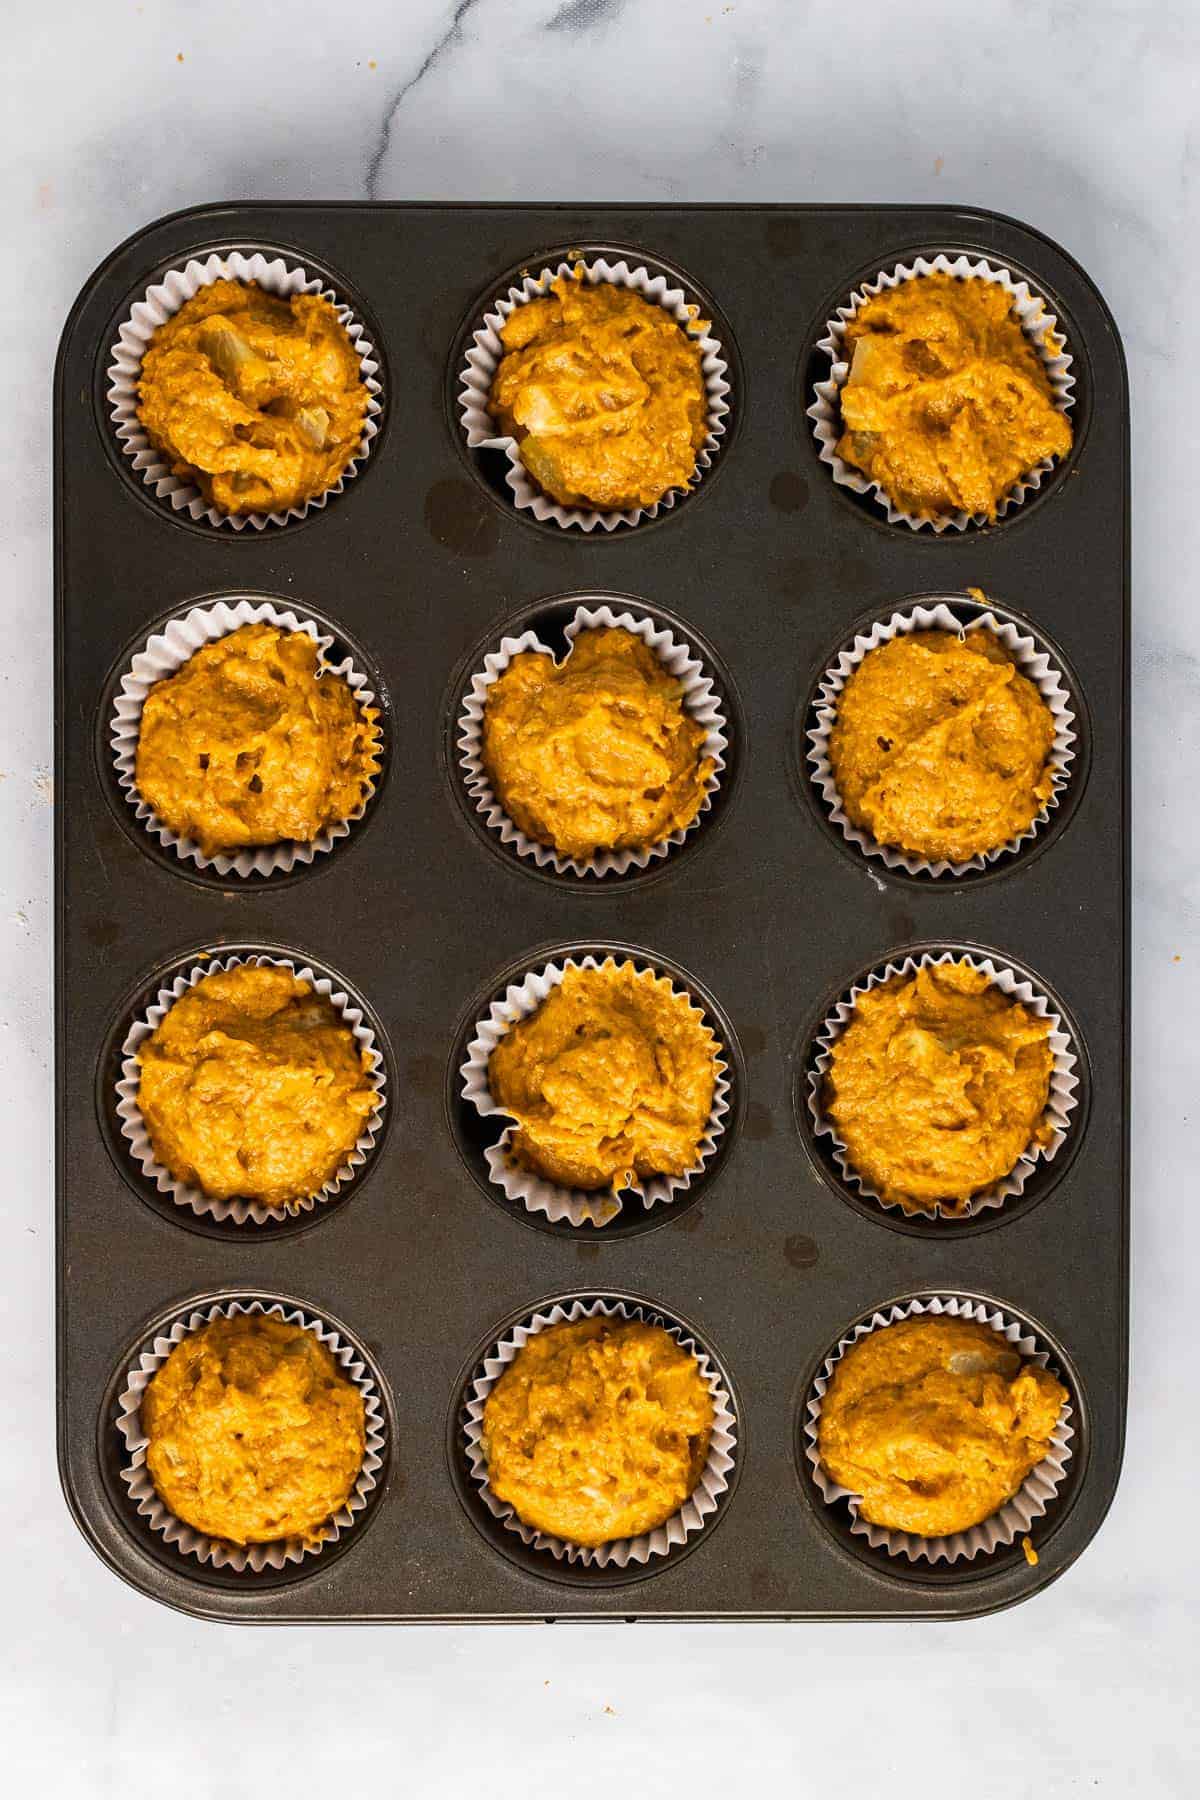 Batter distributed evenly into 12 muffin cups in a tray, as seen from above